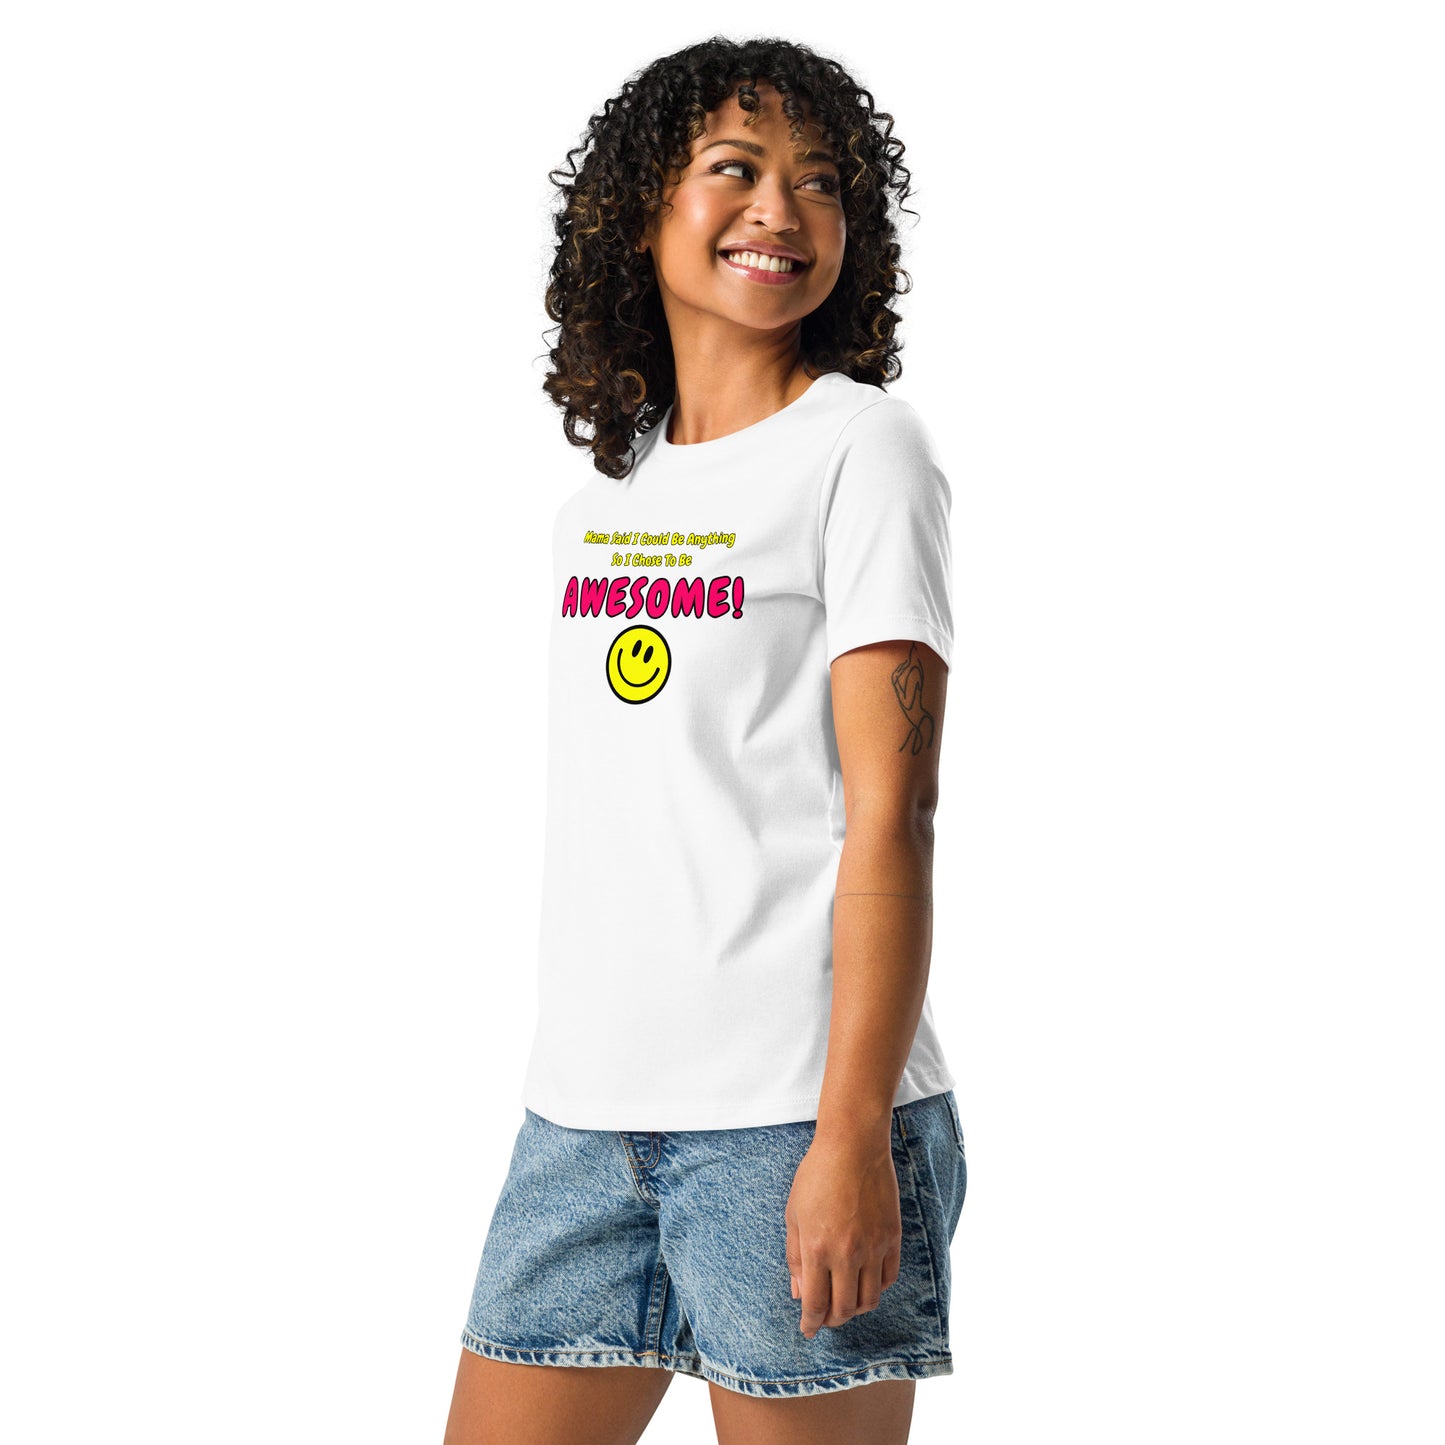 Mama Said I Could Be Anything So I Chose To Be AWESOME! Women's Relaxed T-Shirt